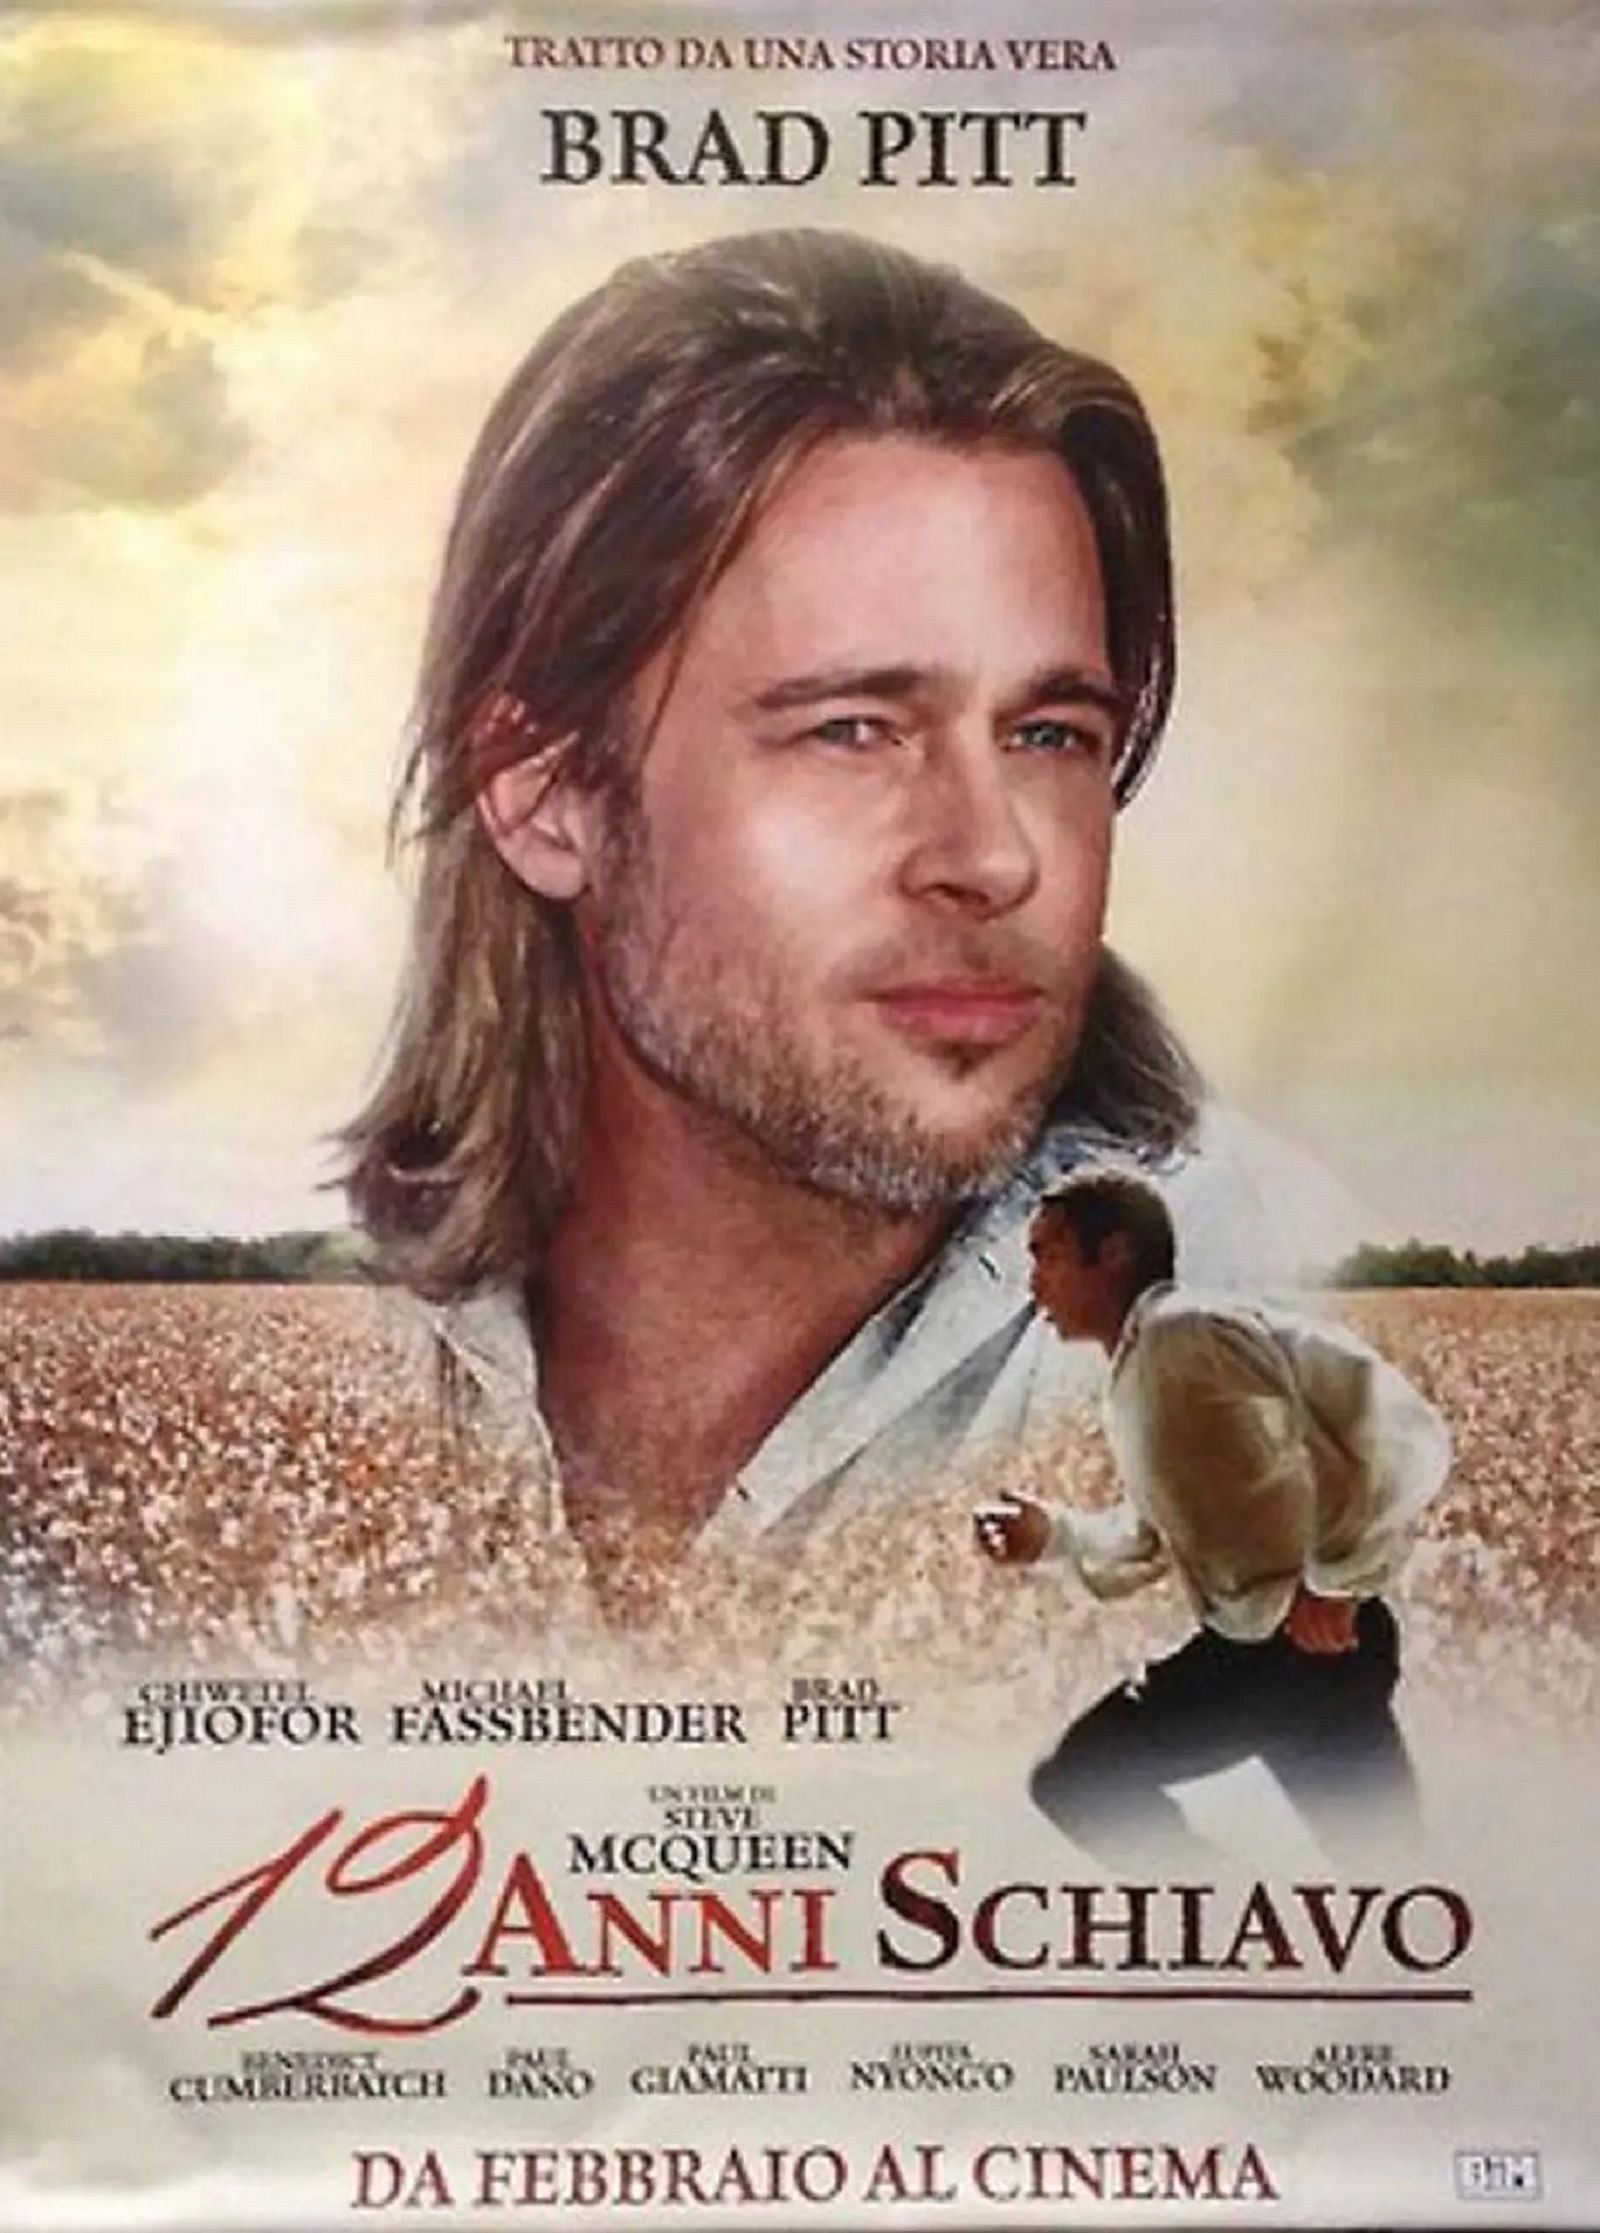 photoshop fails go to the movies photo 49